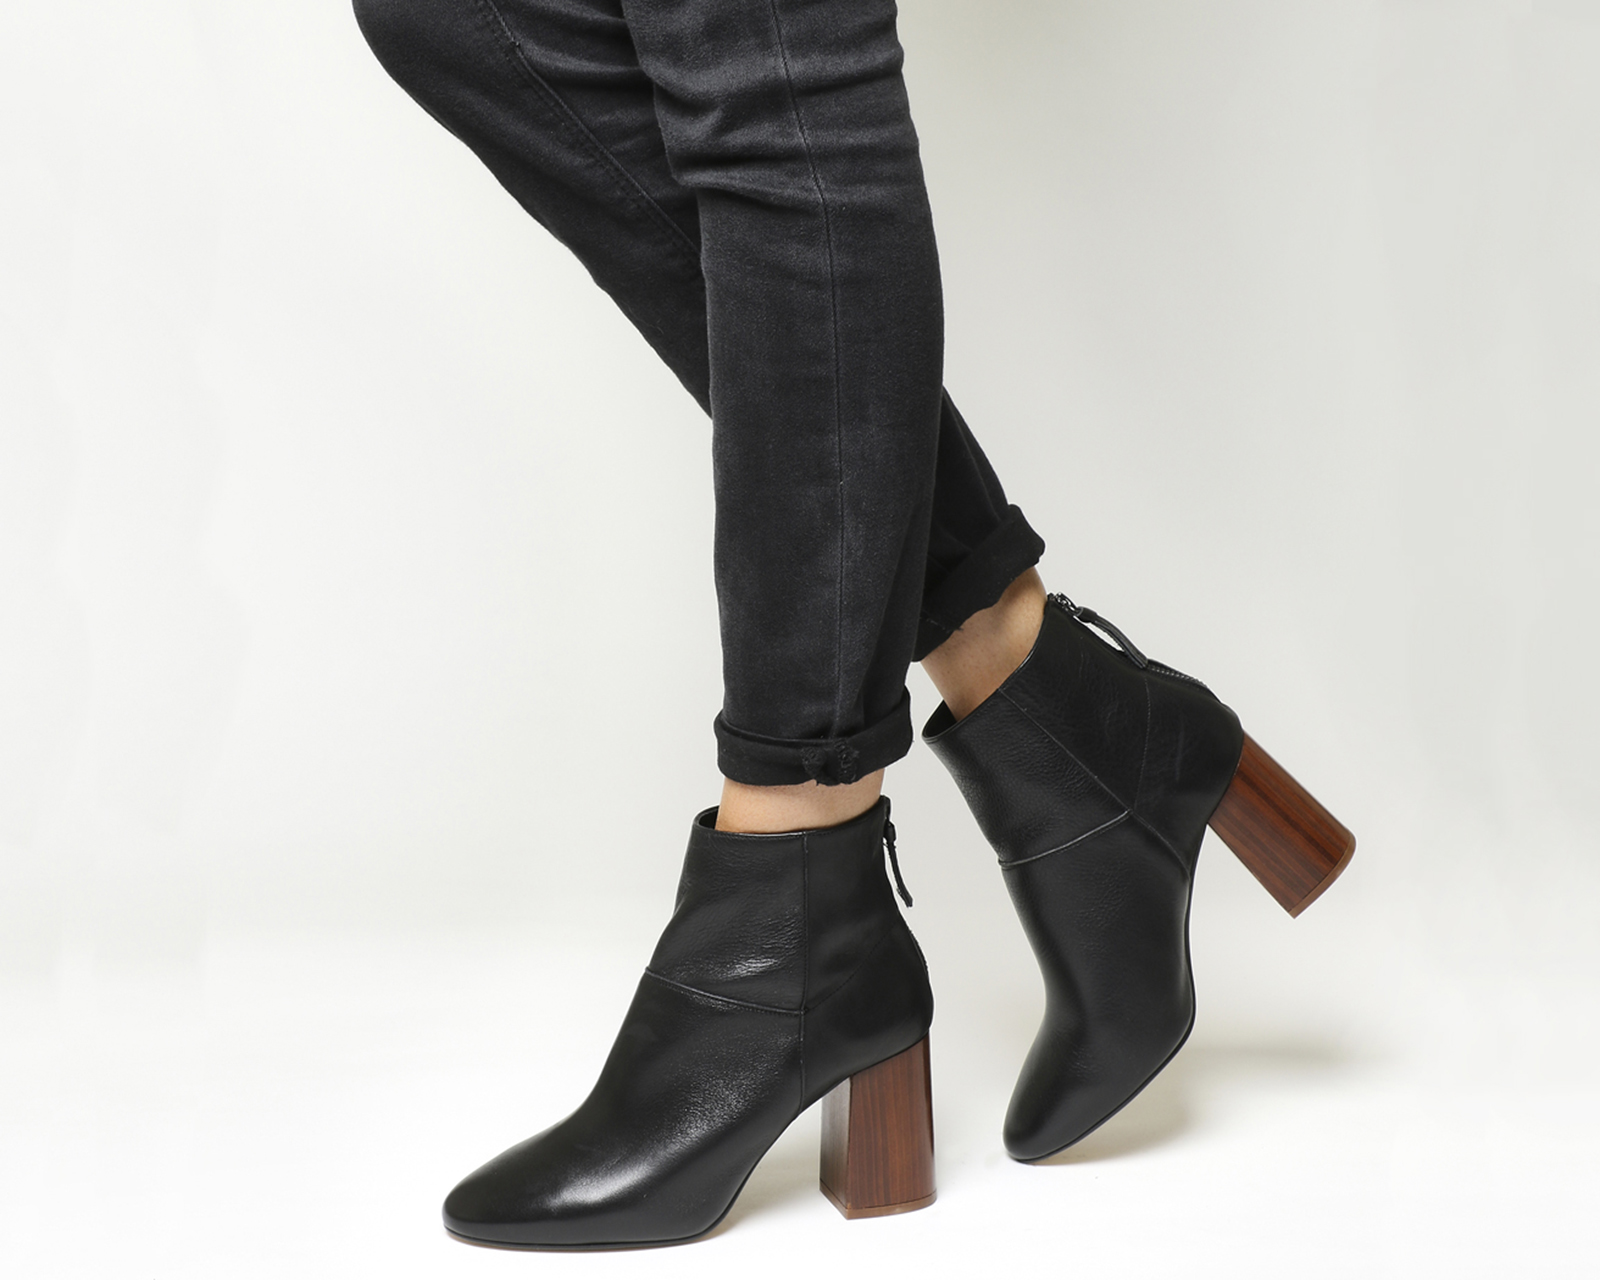 OFFICE Lavender Block Boots Black Leather - Women's Ankle Boots